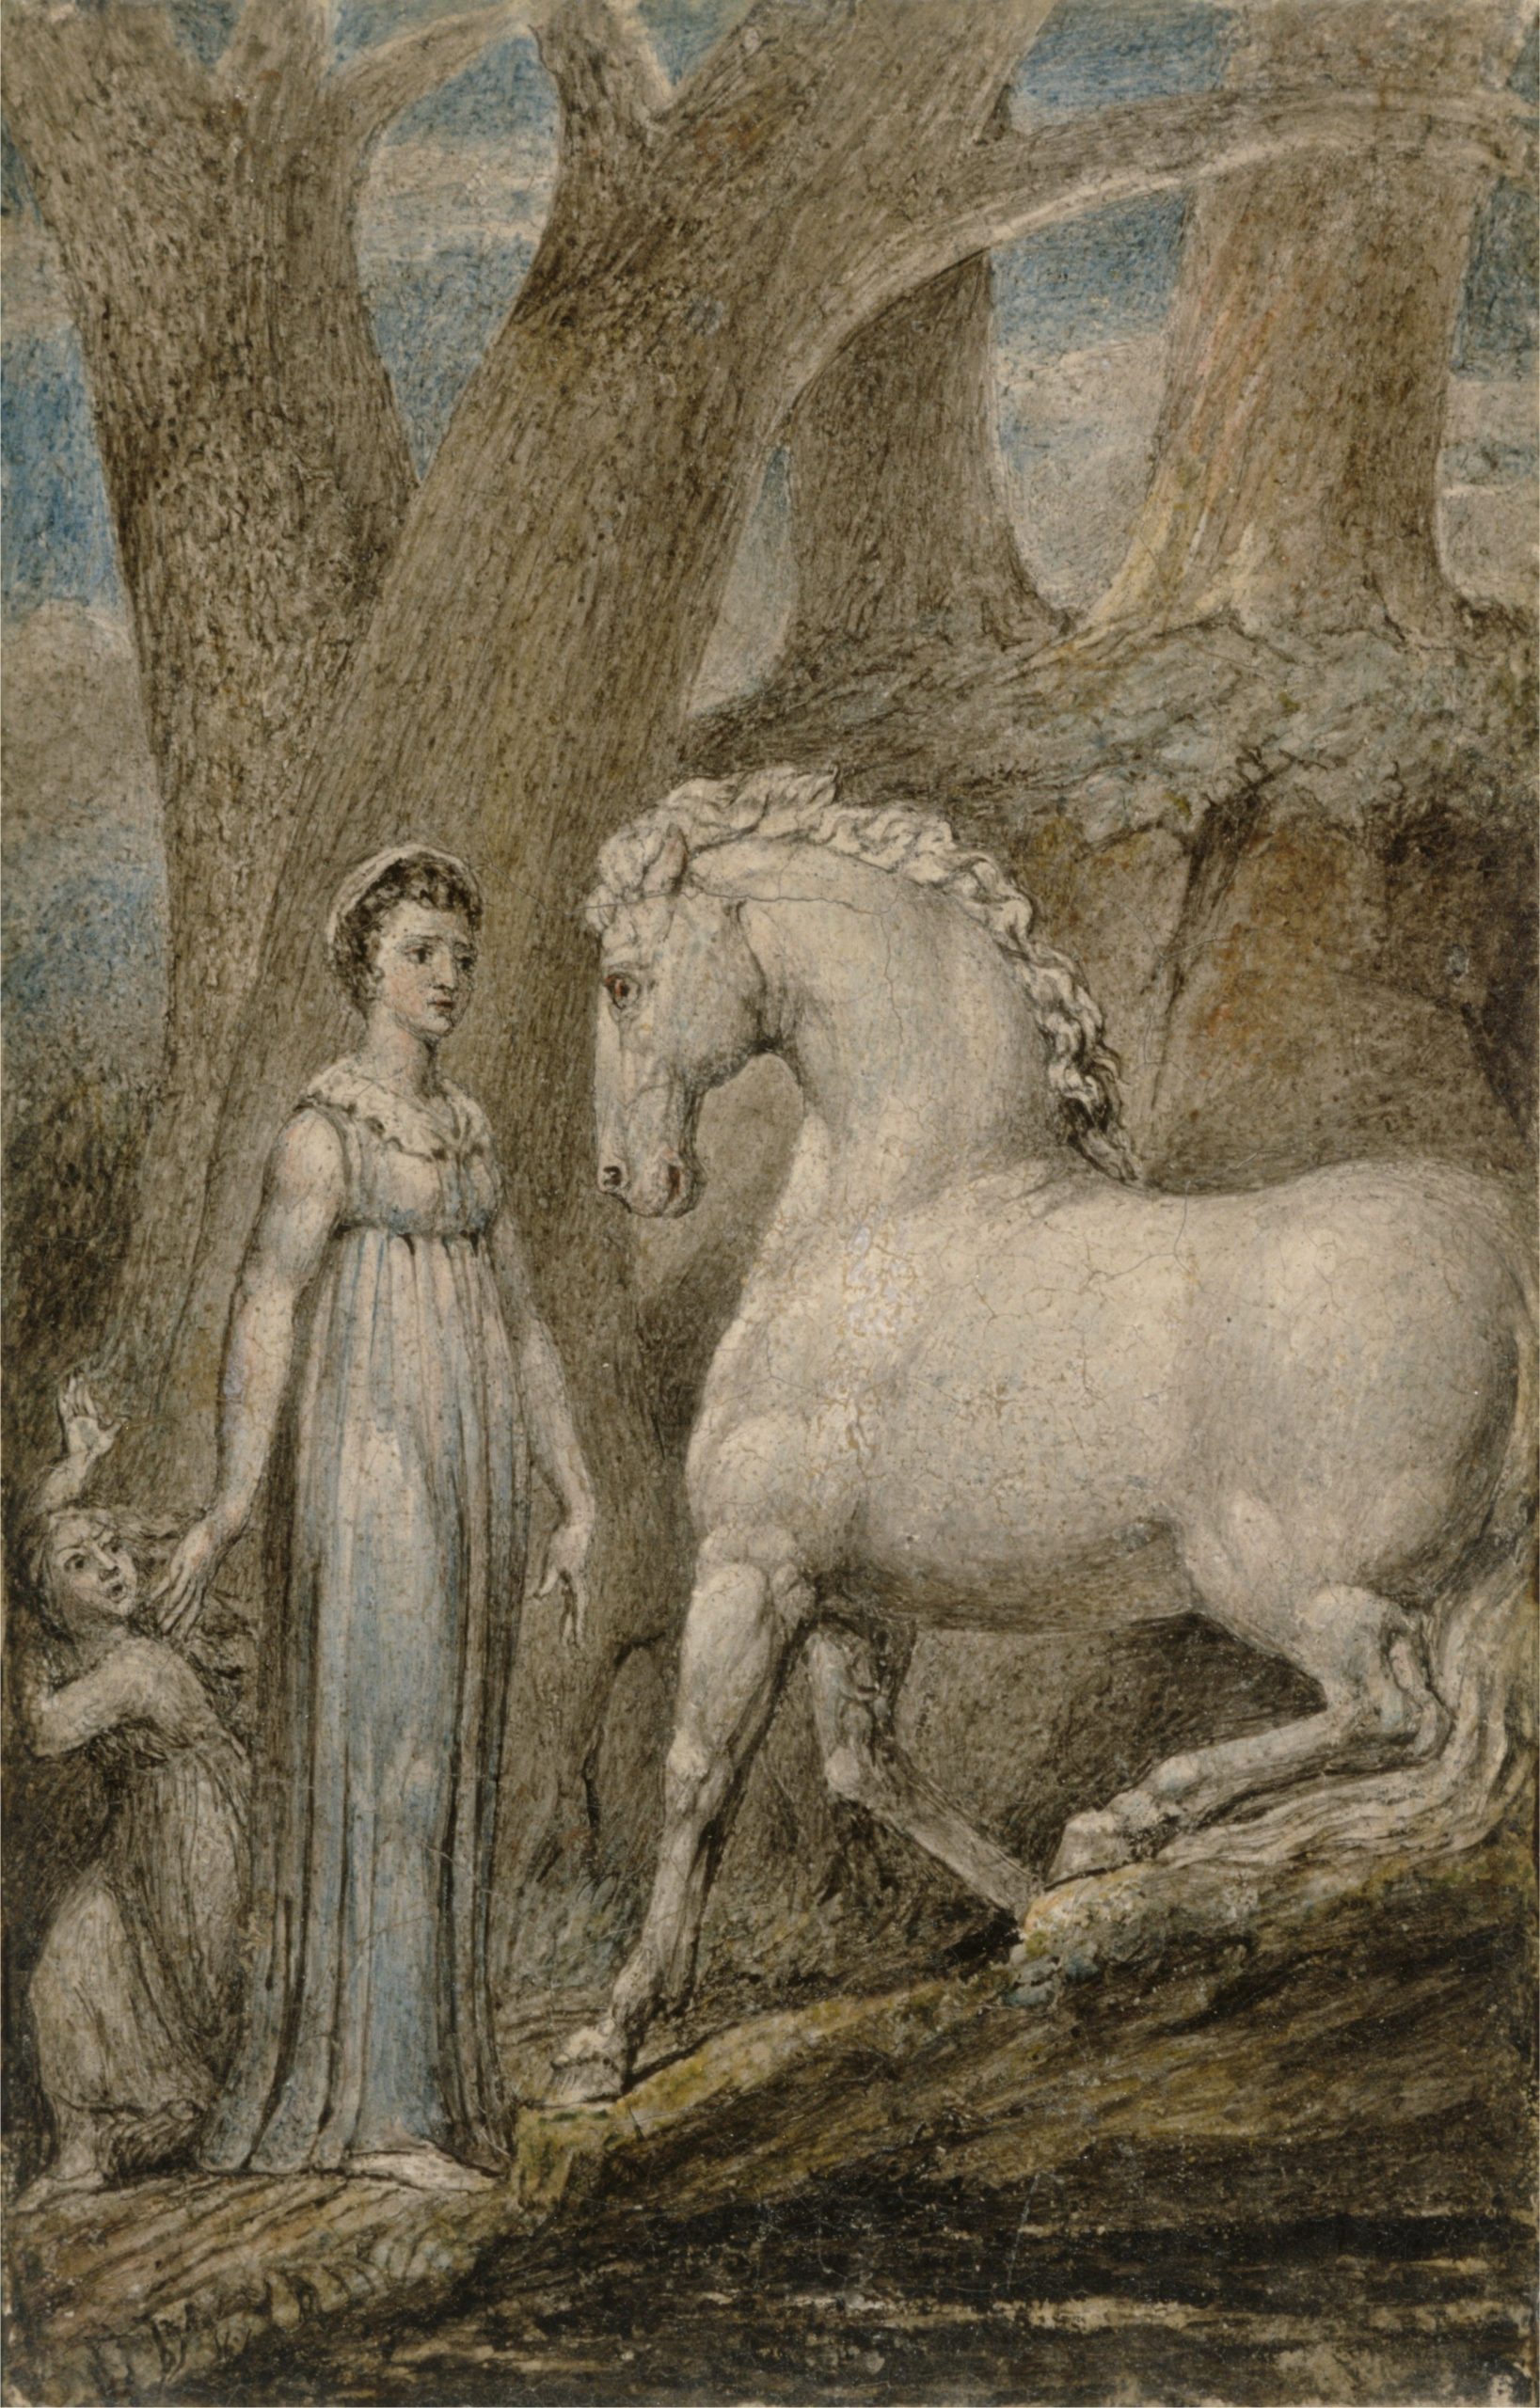 A young woman faces a horse while shielding a young girl in a forest setting.